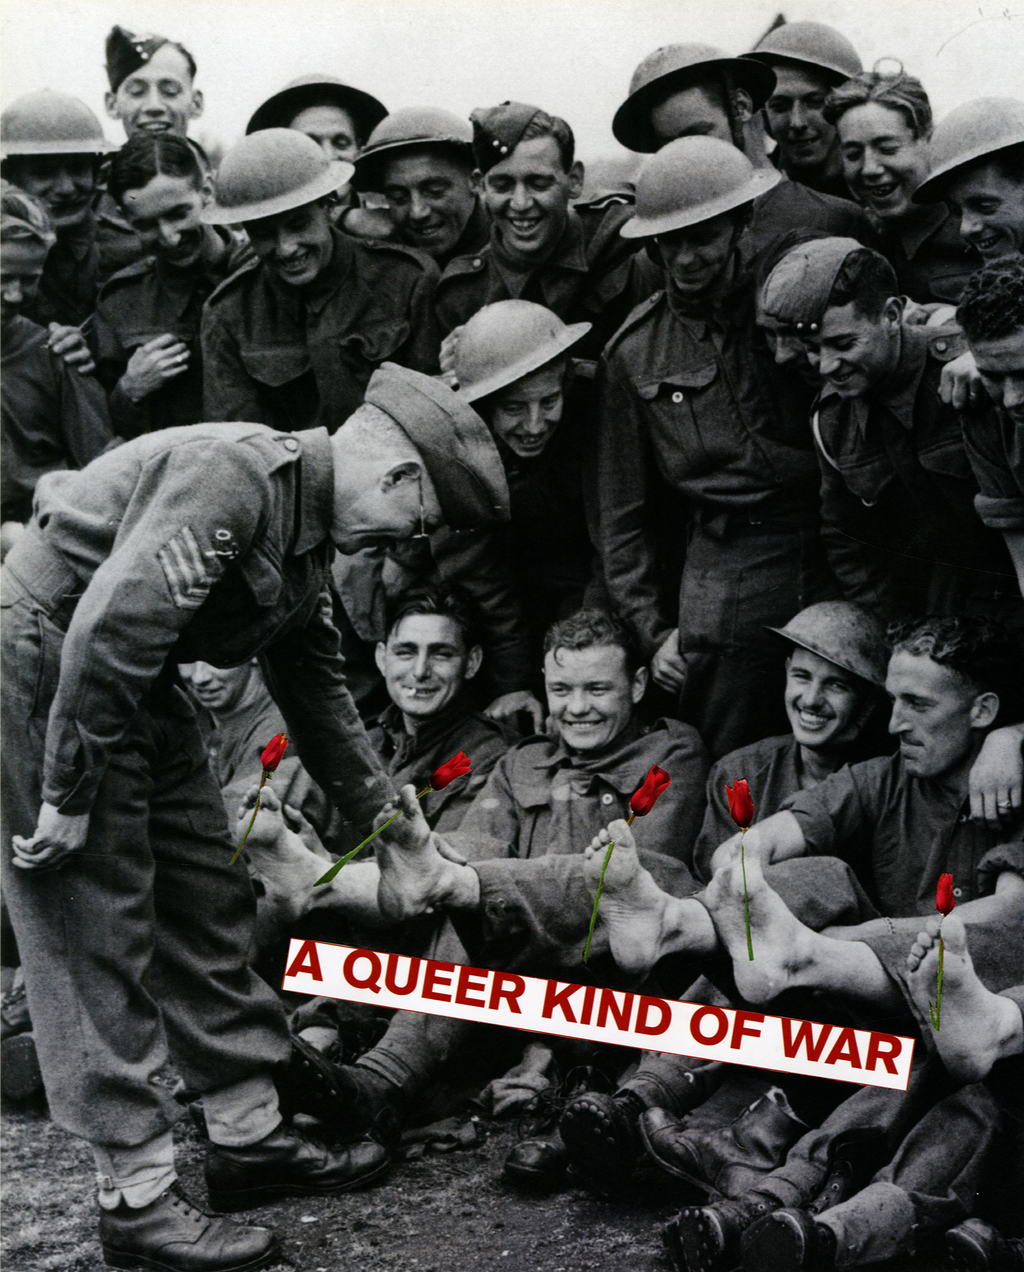 A Queer Kind of War Analogue Collage